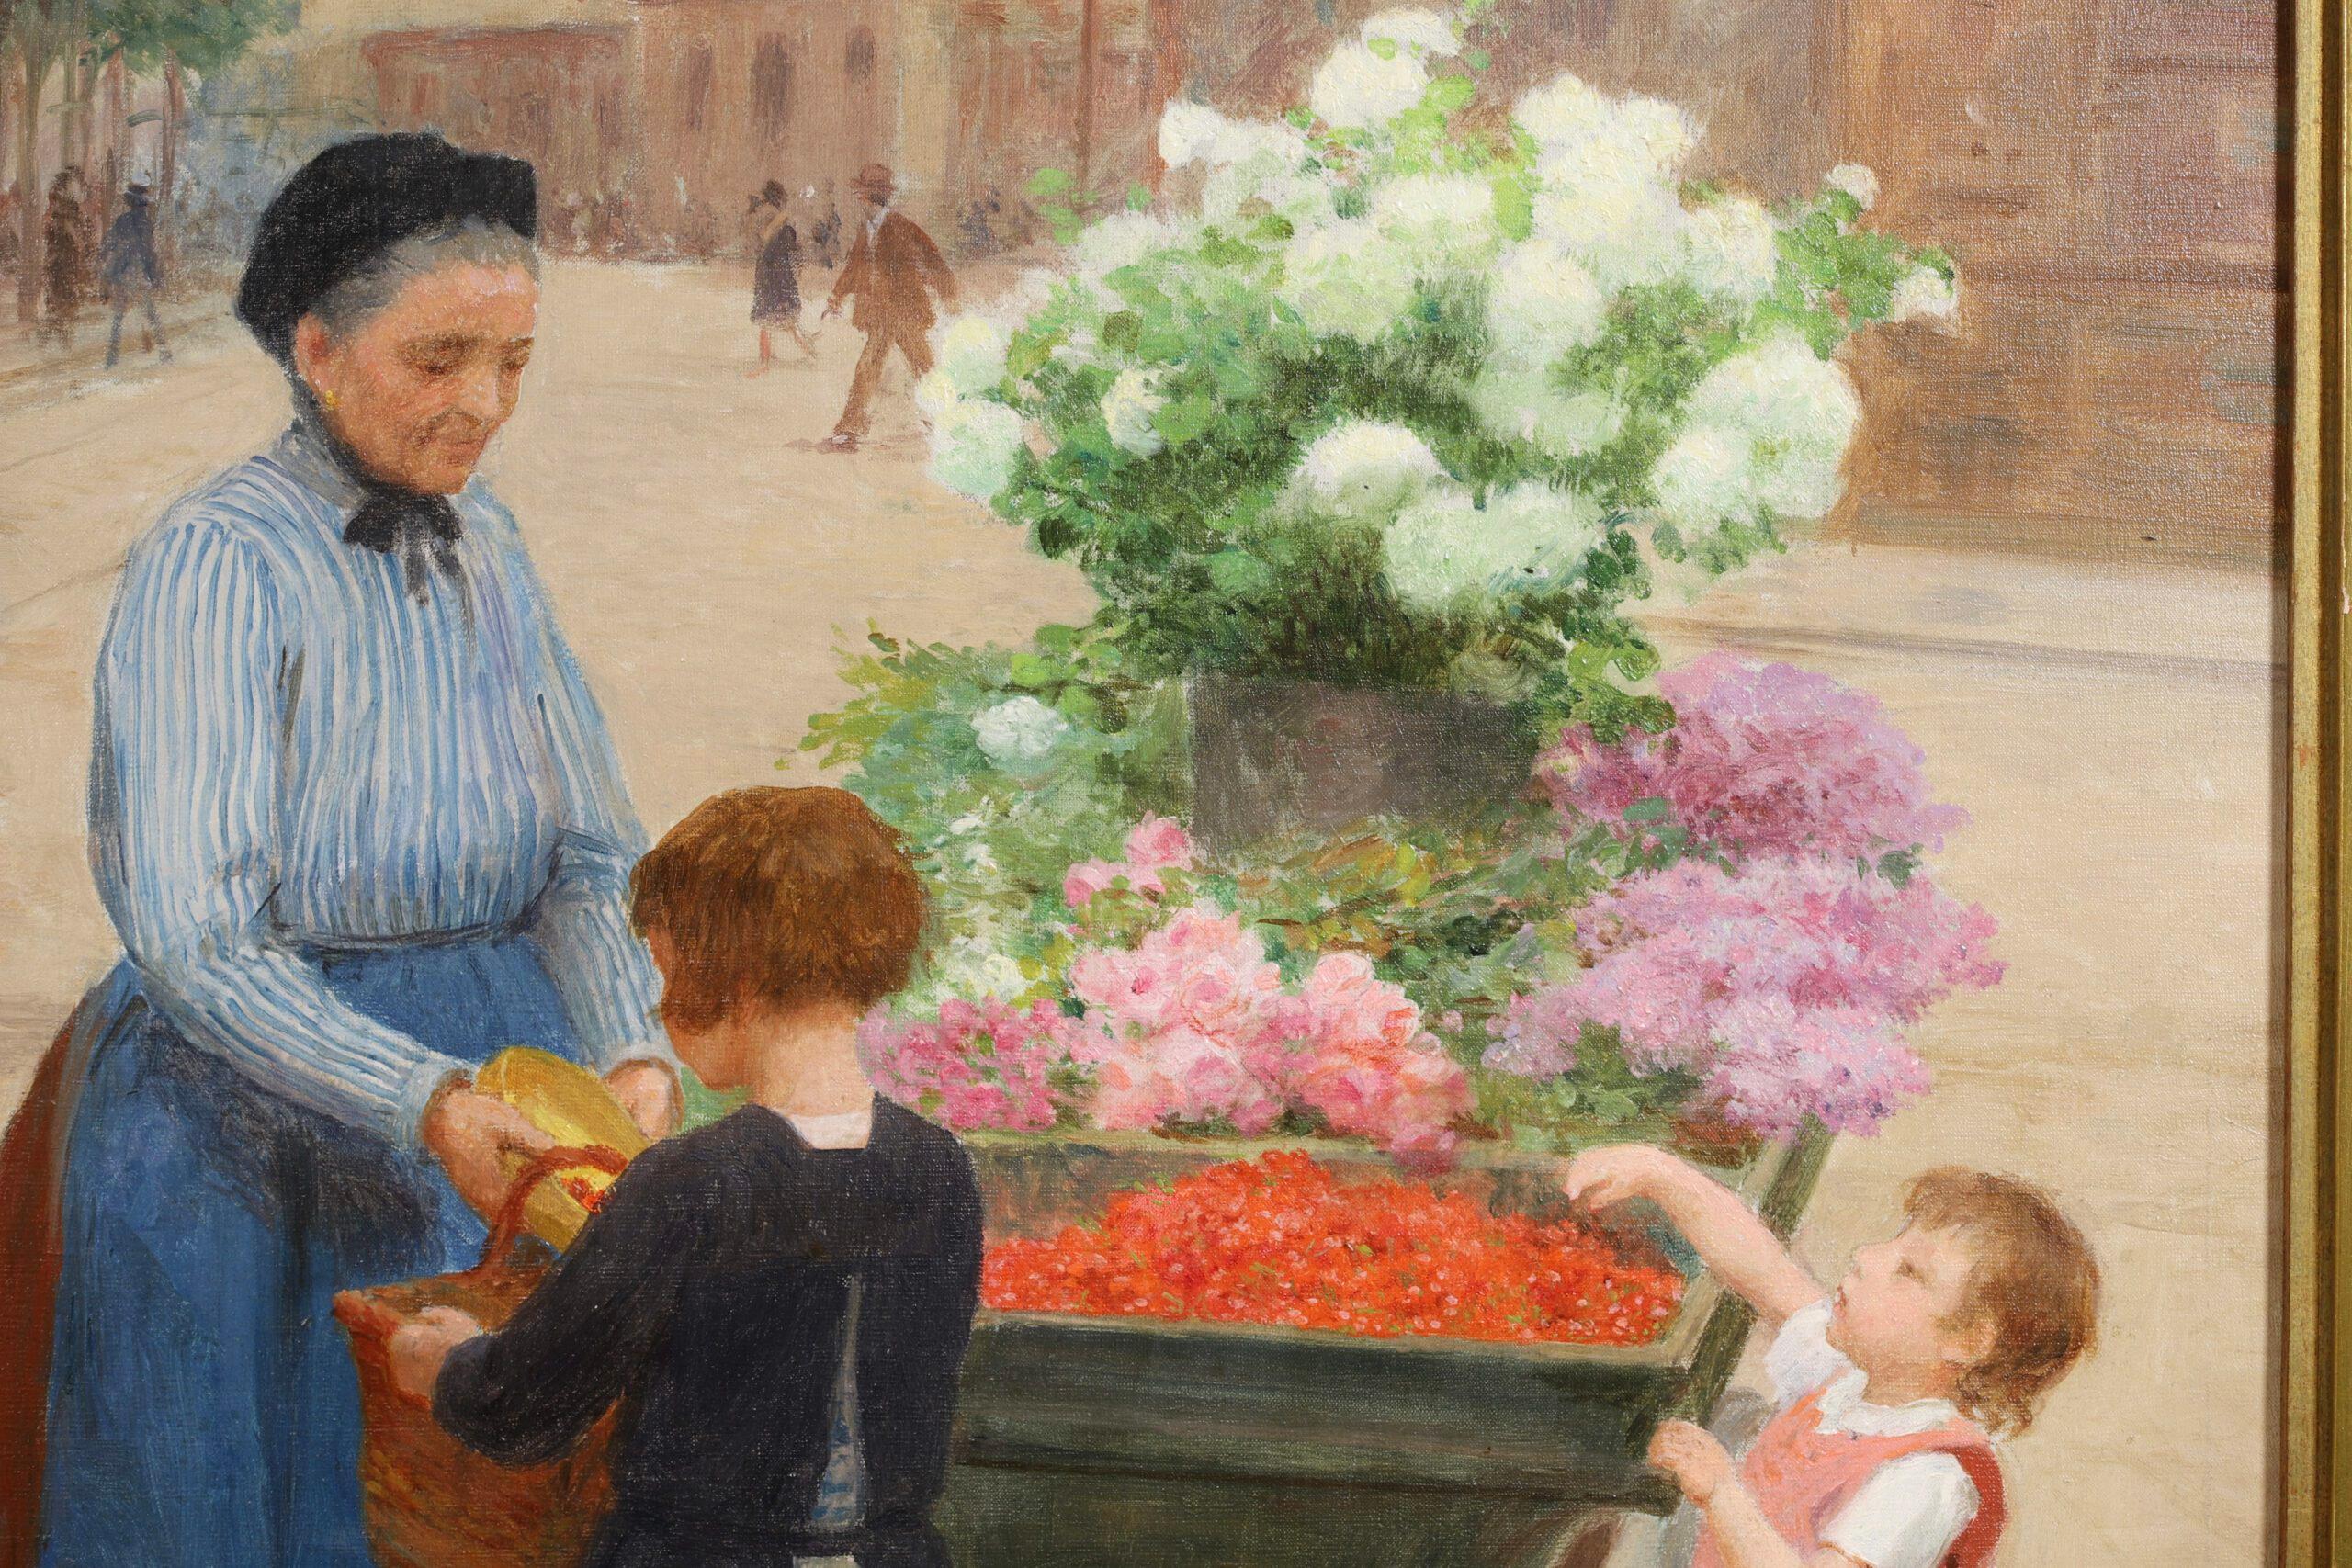 Signed figurative oil on original canvas by French realist painter Victor Gabriel Gilbert. The work shows a flower seller filling a young girl's basket with cherries while a little boy cheekily steals one from her cart. The busy Parisian street can